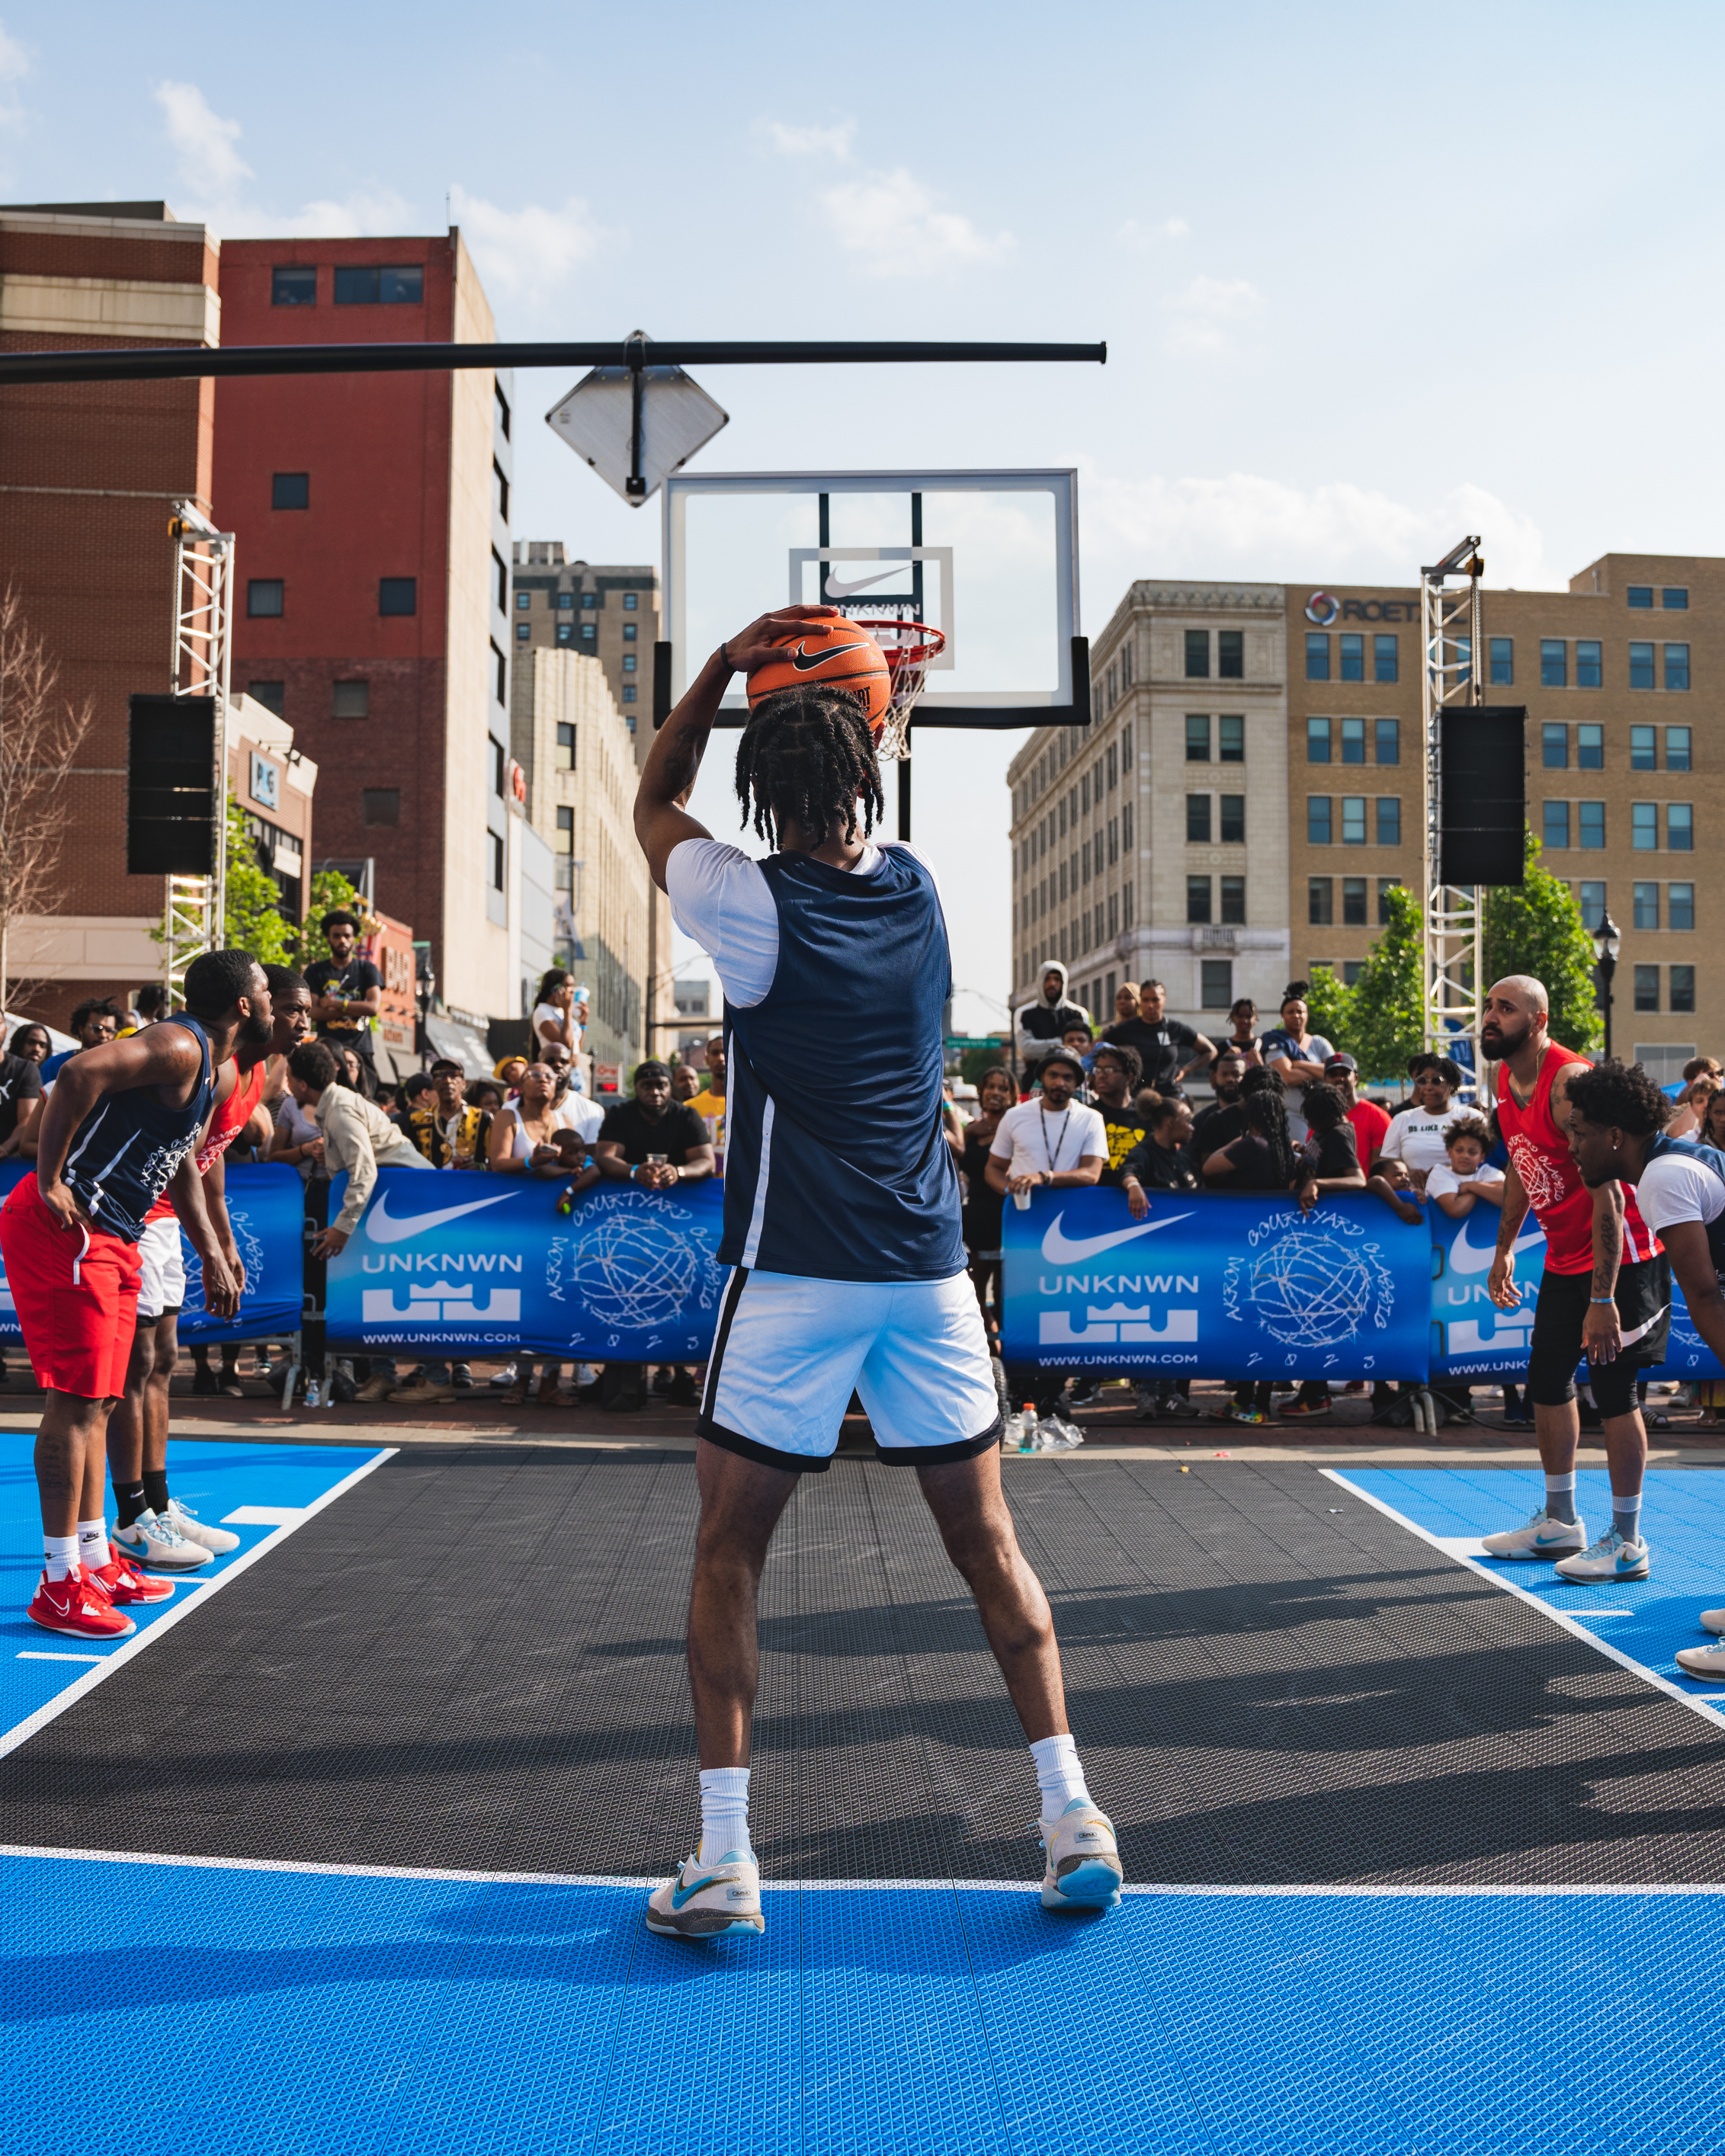 Nike, Unknwn to unveil LeBron James limited edition shoe at Courtyard  Classic basketball tournament, block party 